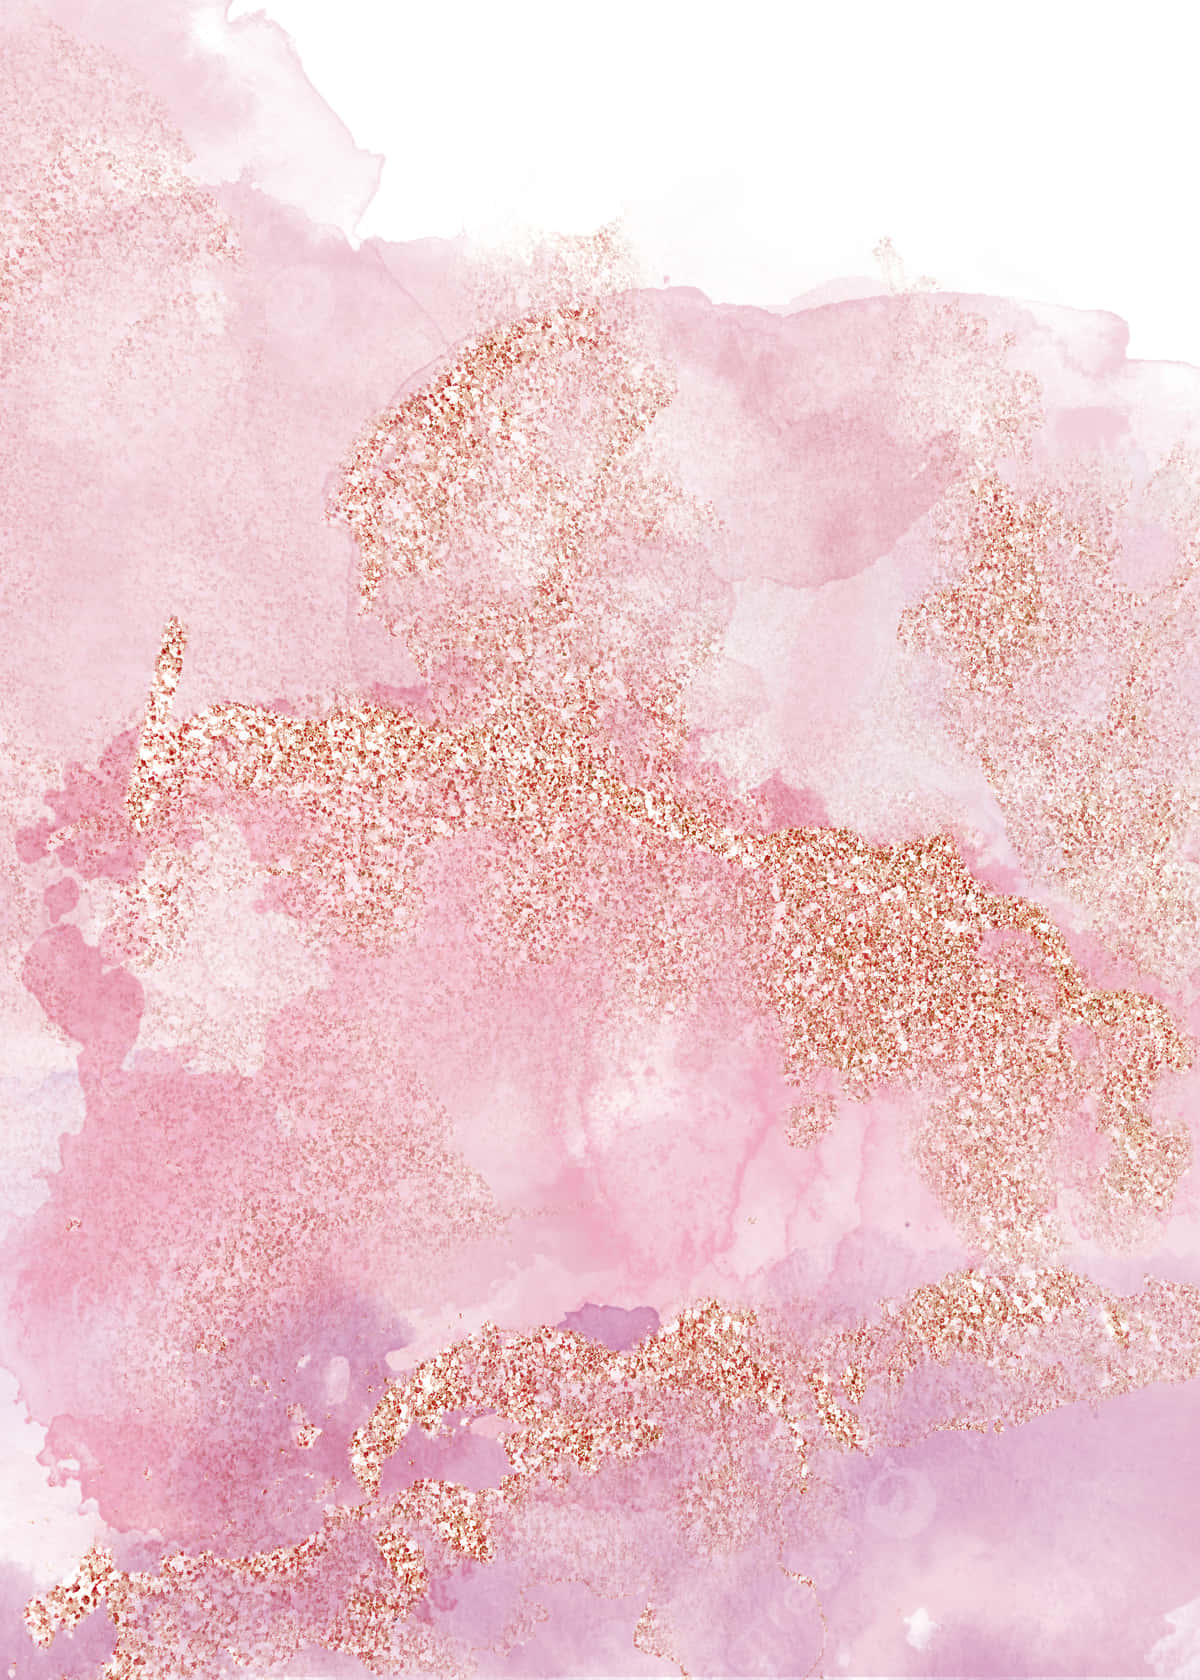 Pink Watercolor Background With Gold Splatter